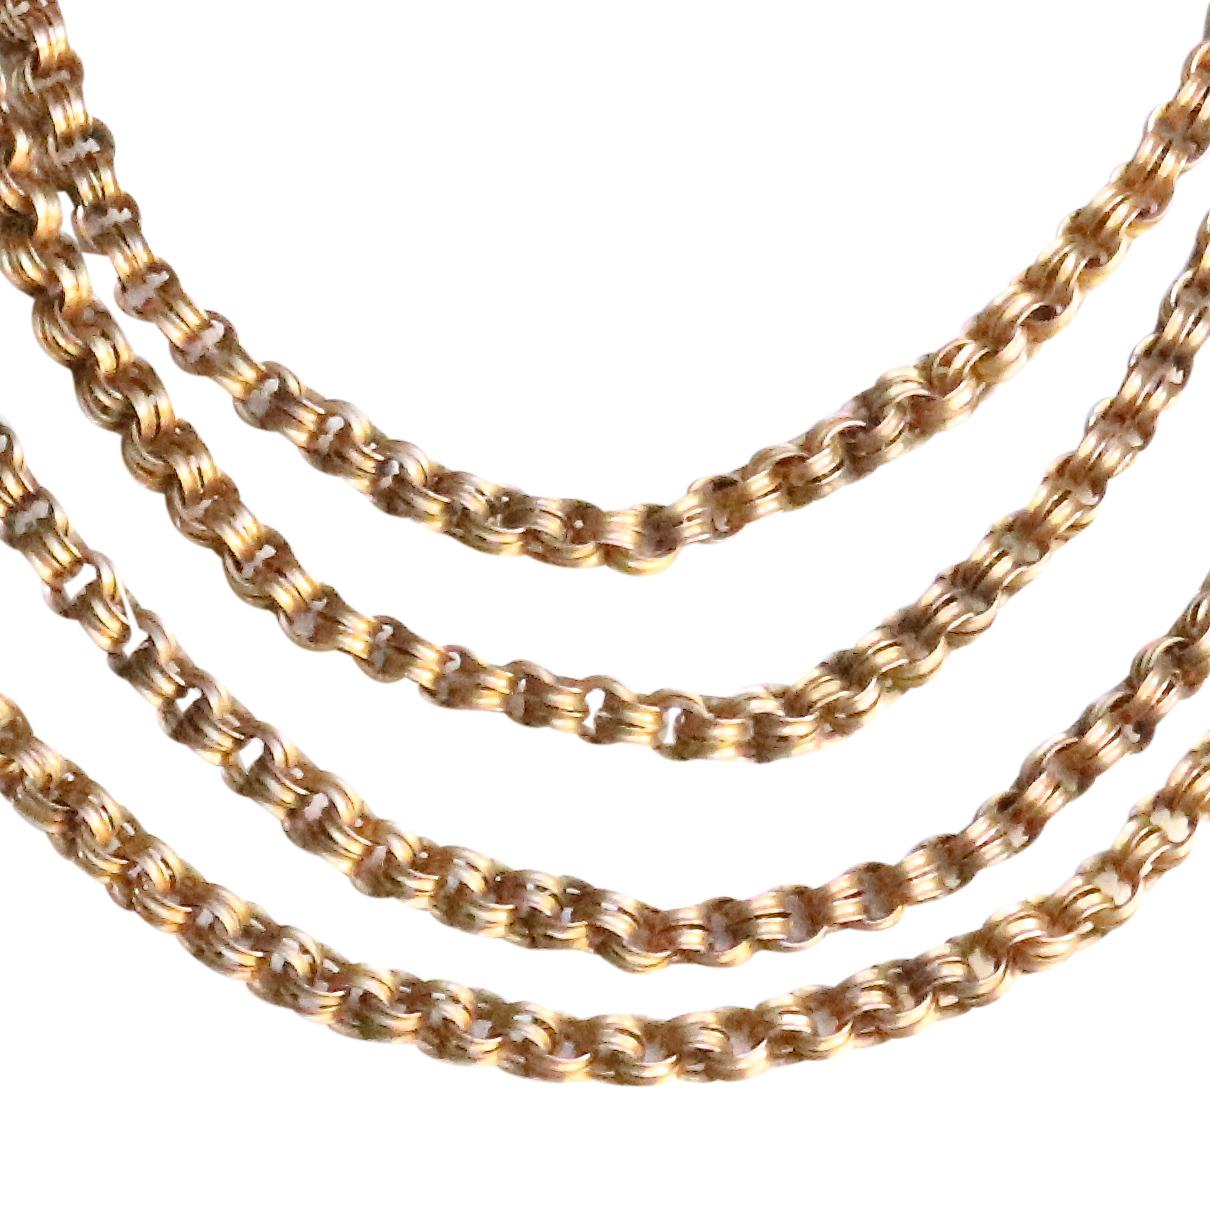 Mid-Victorian 10k gold necklace. Circa 1860-1890s. 60 inches long. 
Jack Weir & Sons Flawless Protection Plan: 
7 day return policy for full cash refund
30 day return for store credit 
Free shipping both ways
100% authenticity guarantee 
Free ring